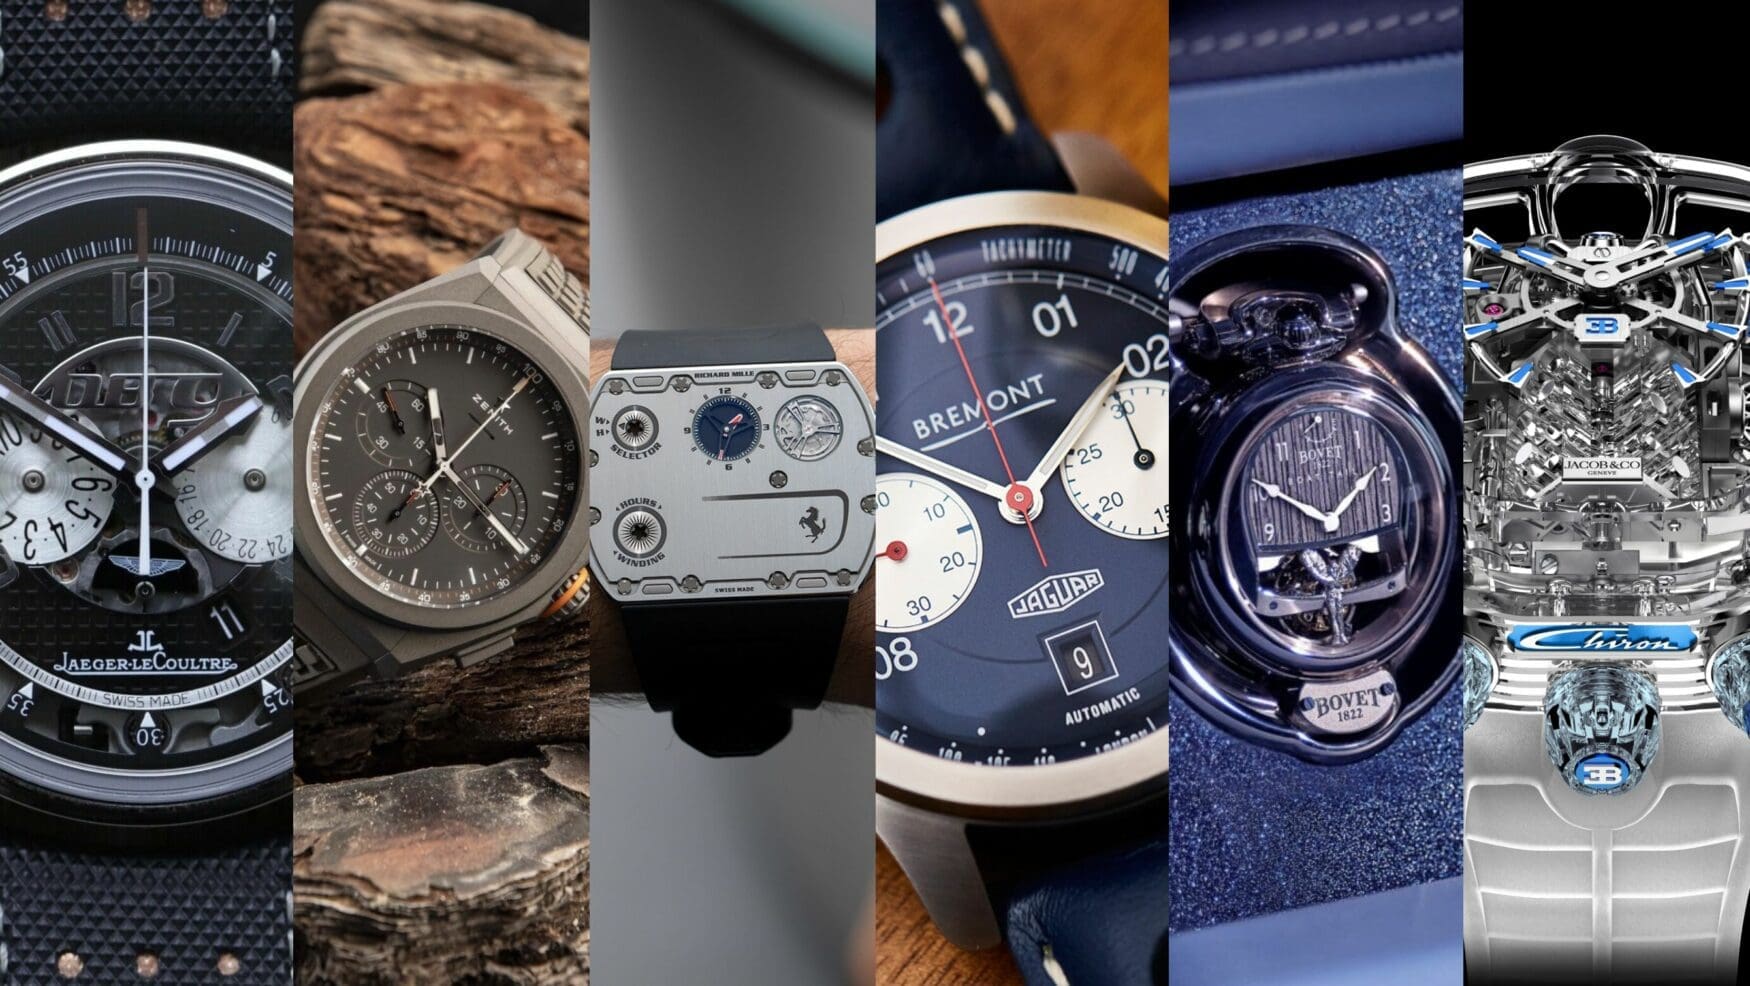 Drive time: The 6 best watch and car brand collaborations